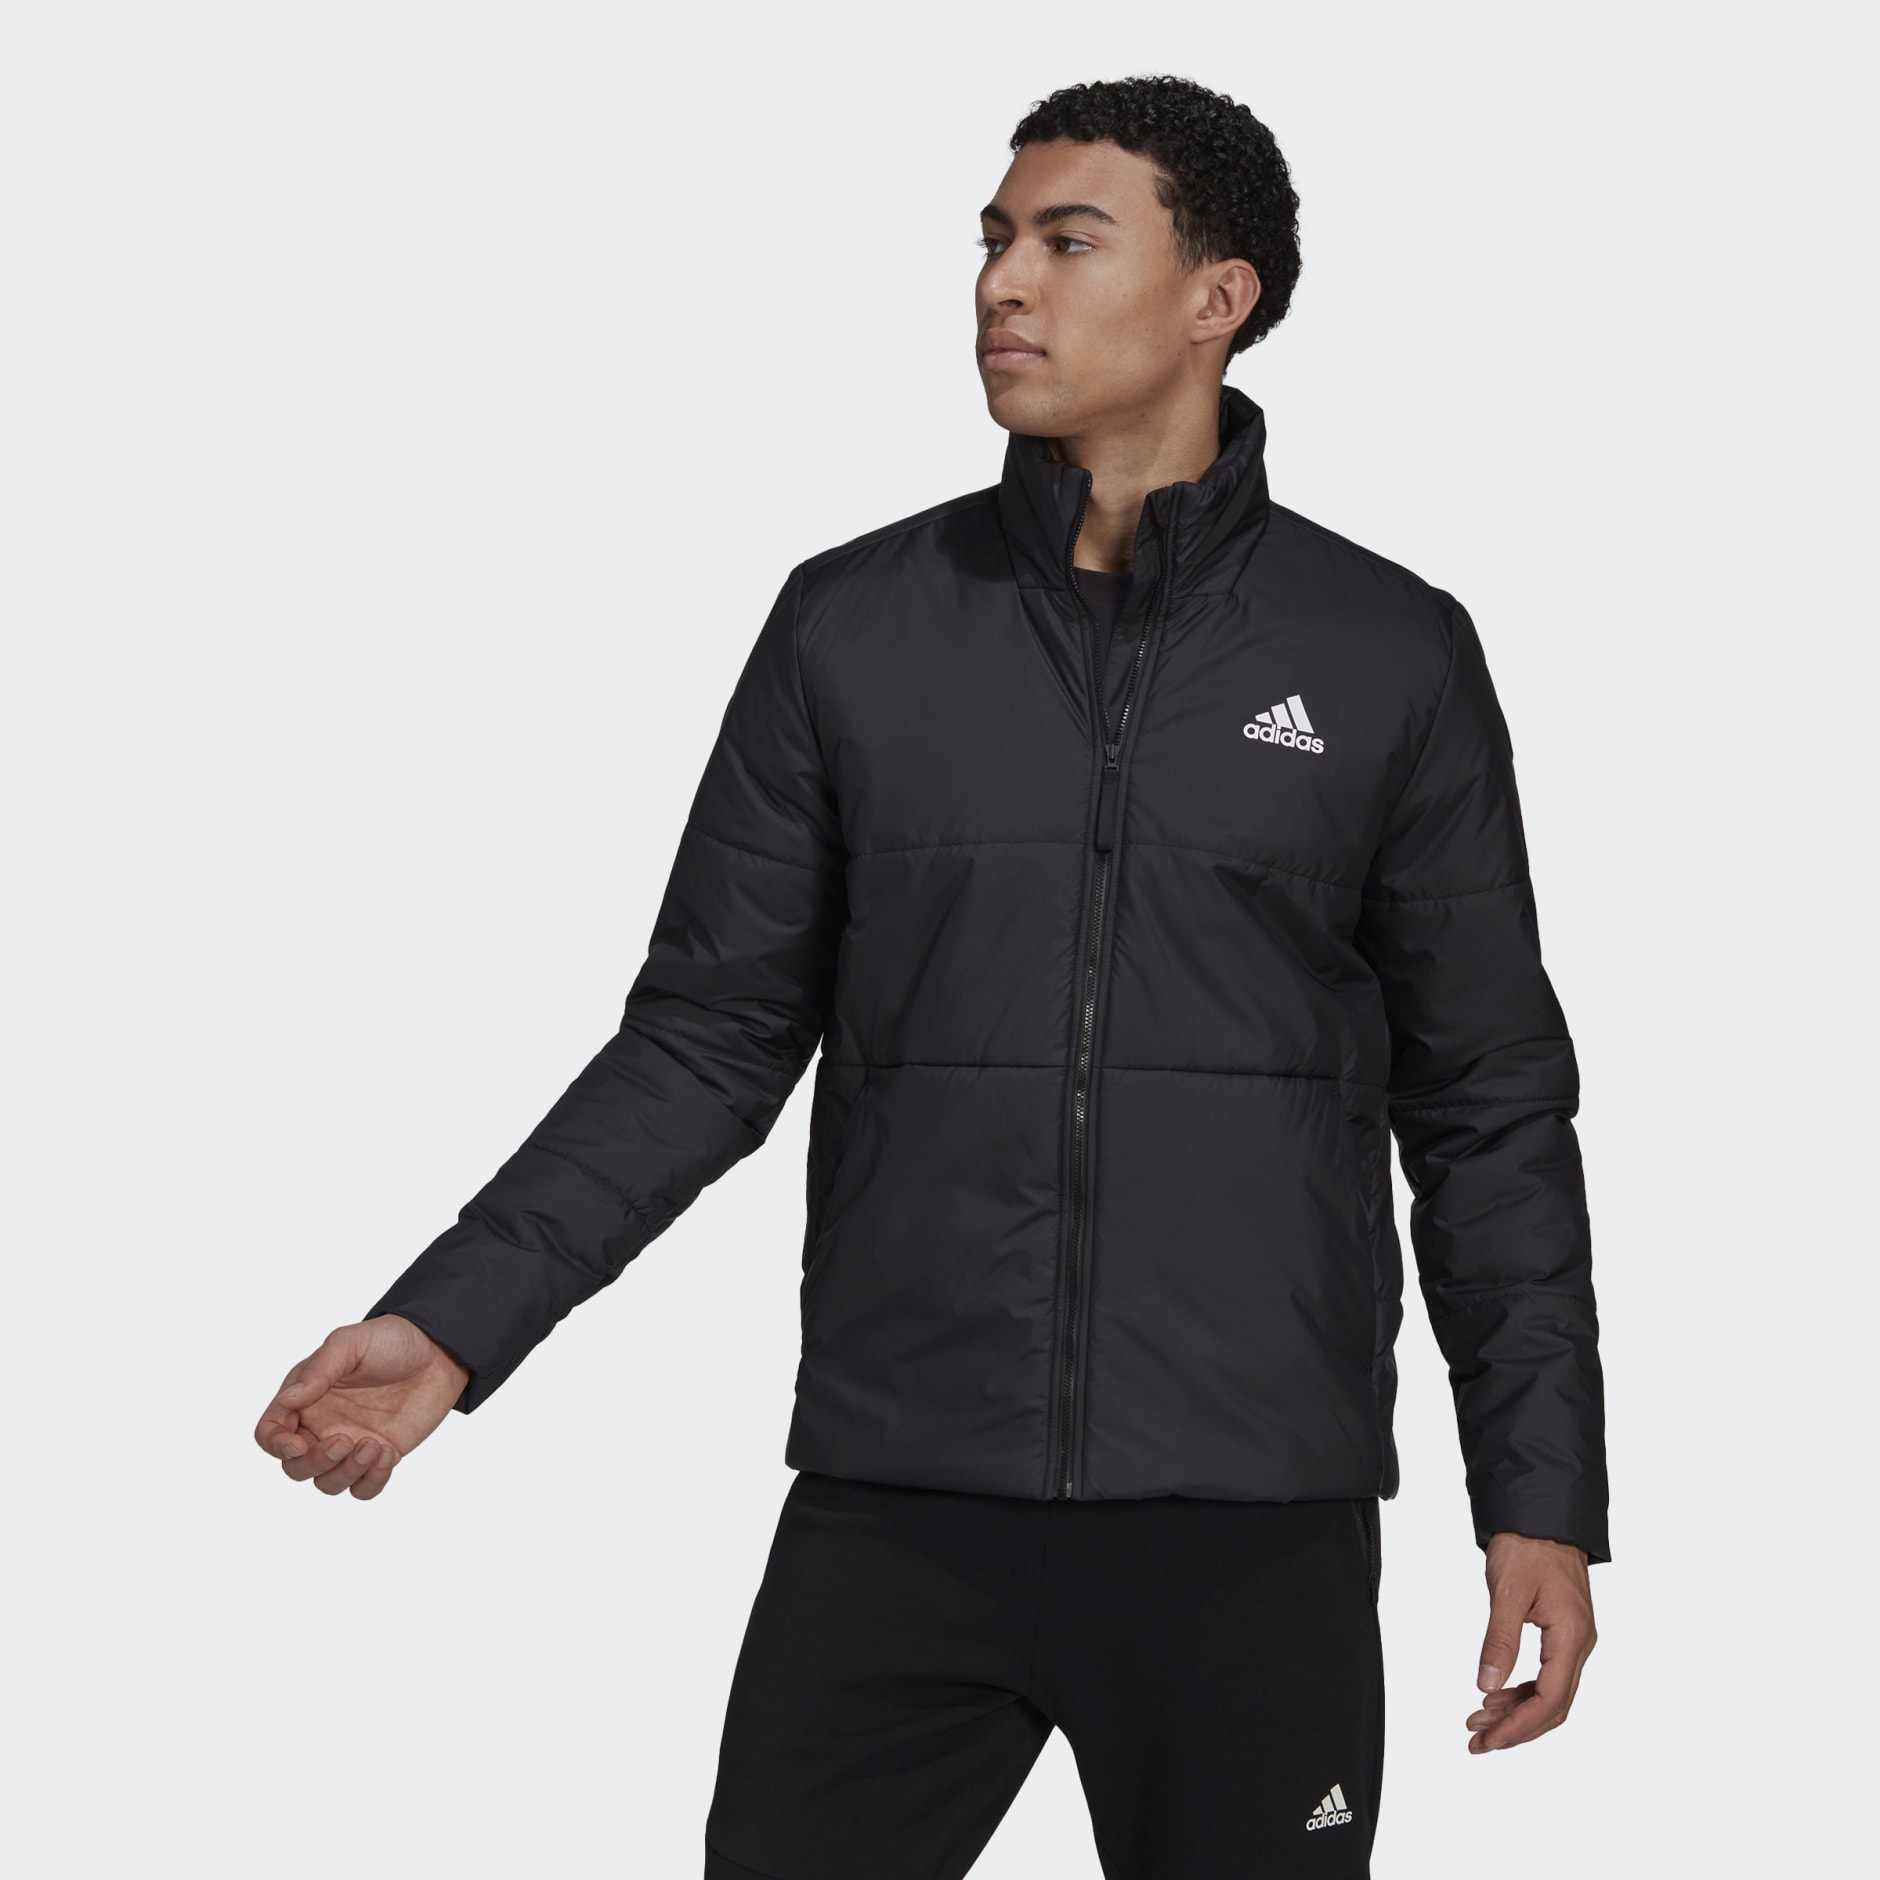 Clothing - BSC 3-Stripes Insulated Jacket - Black | adidas South Africa